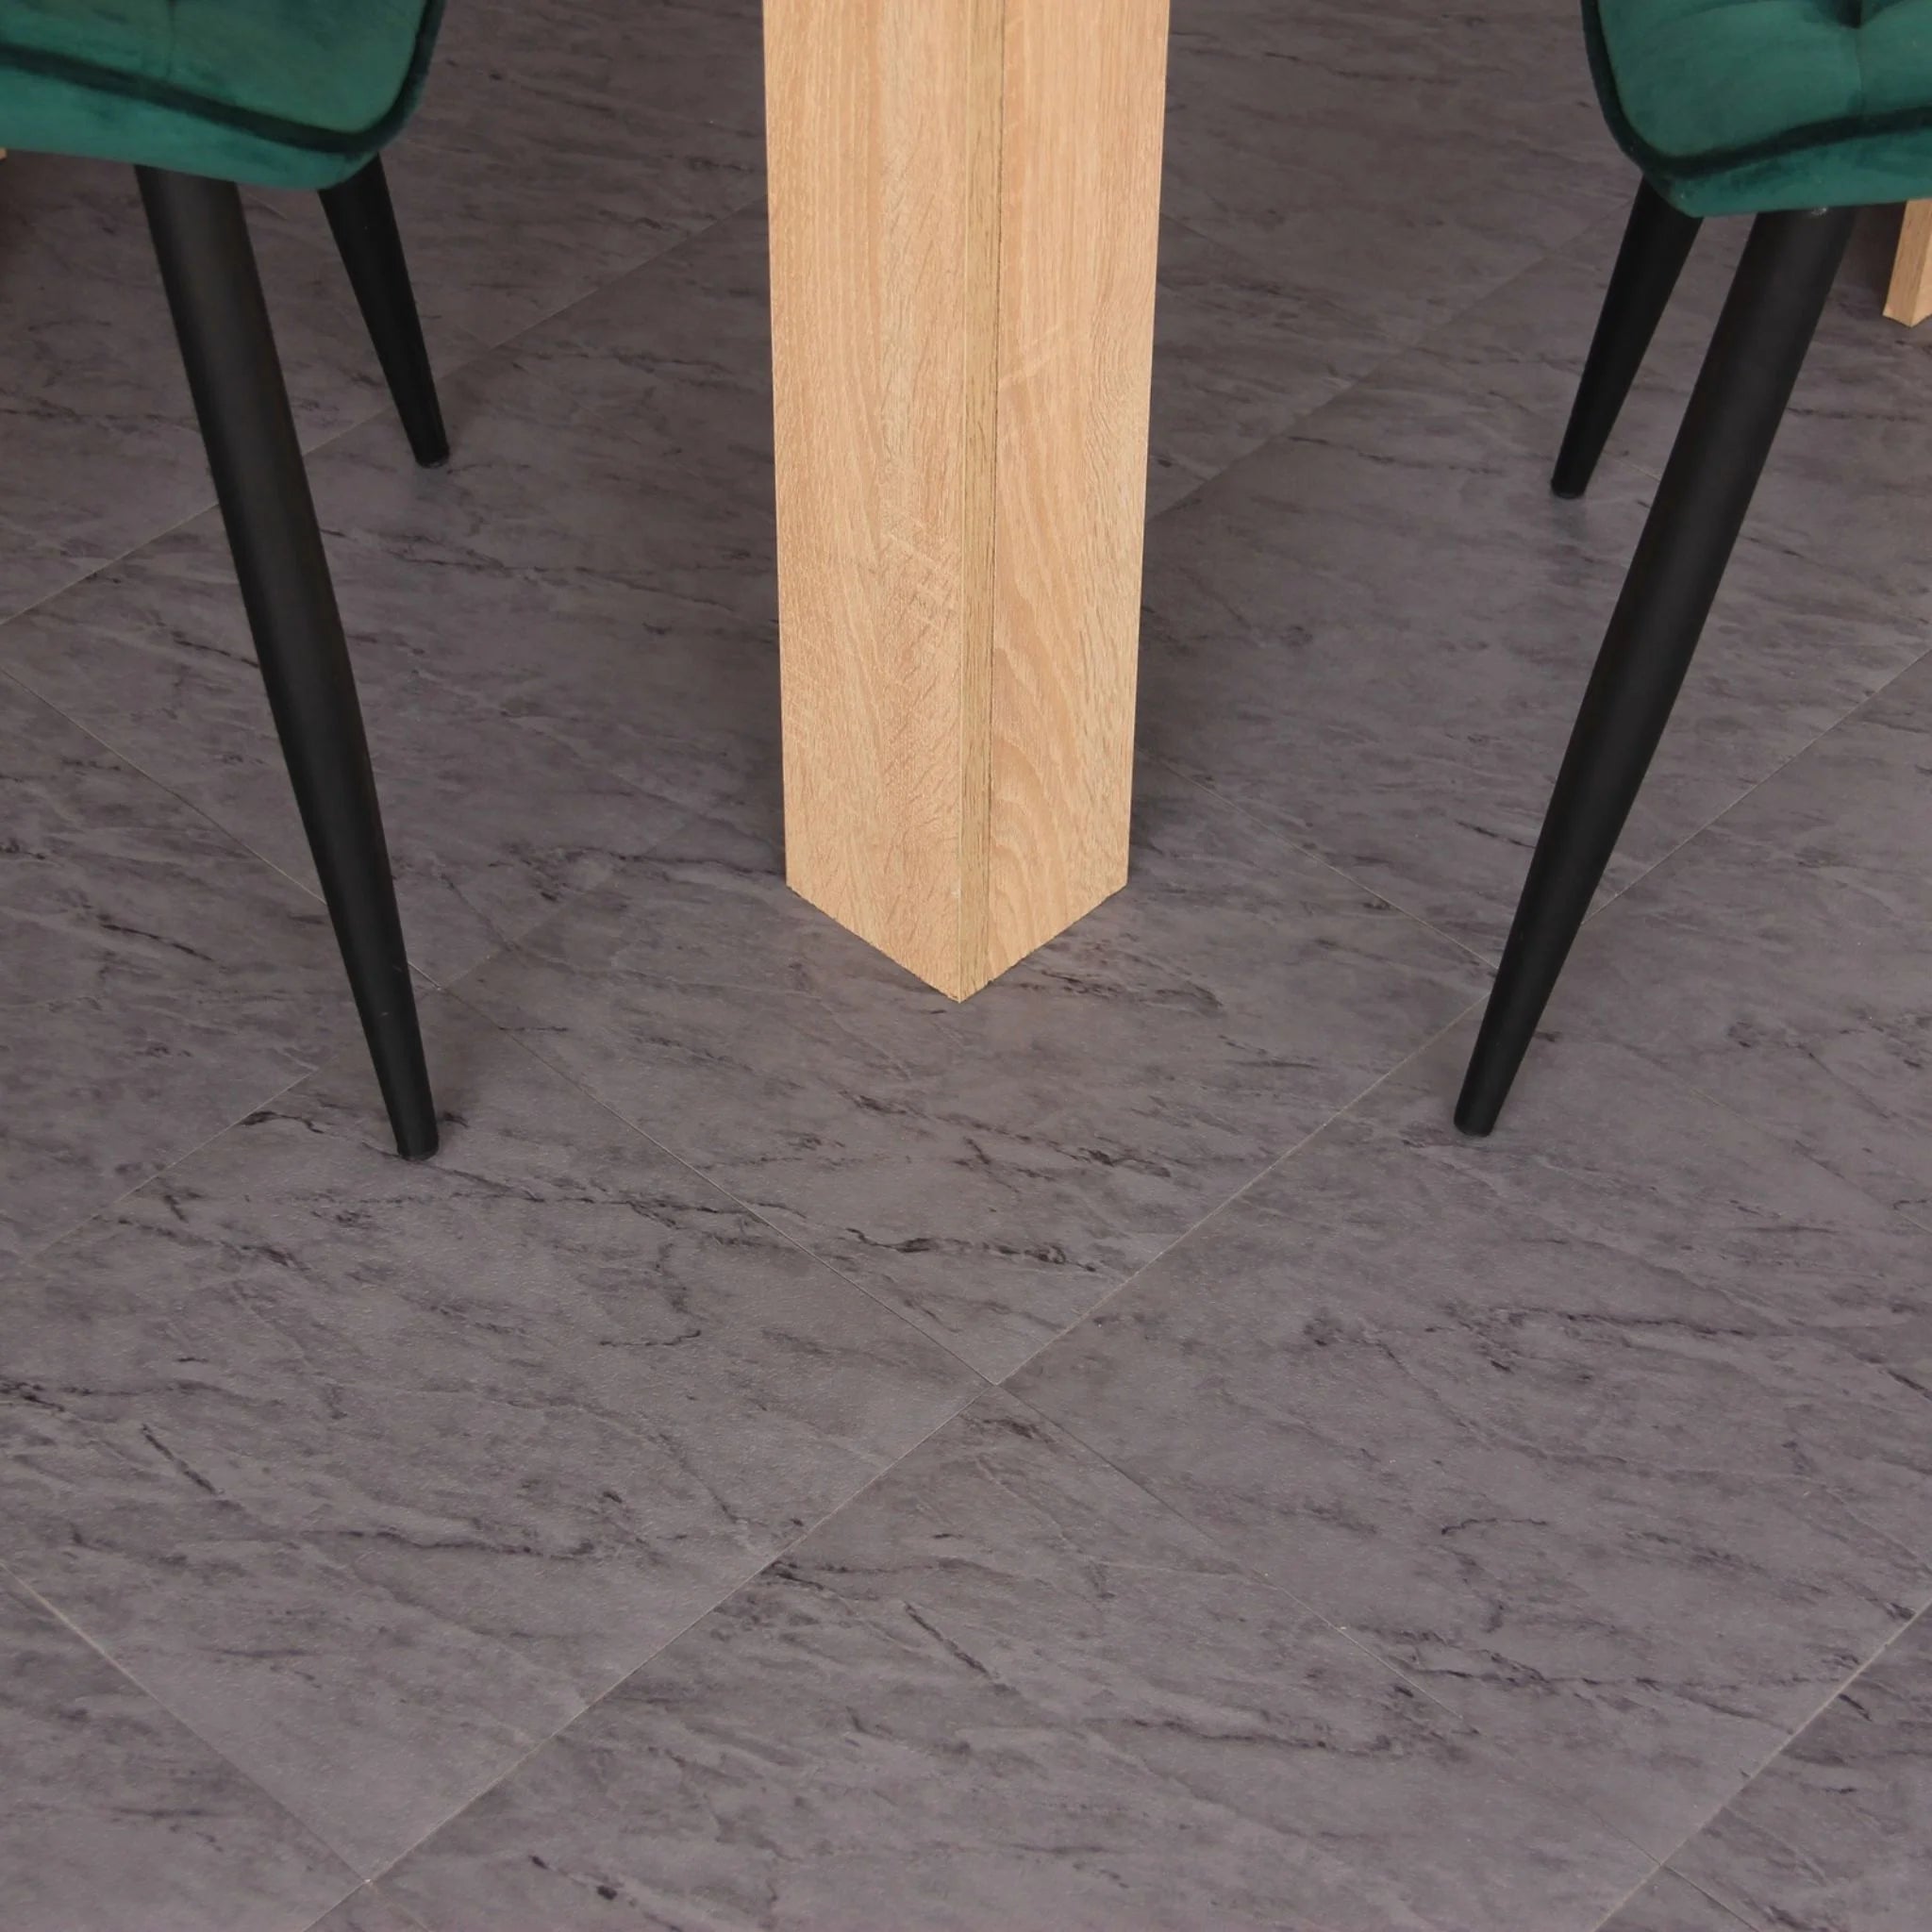 grey marble tile effect flooring under a table and black metal chairs